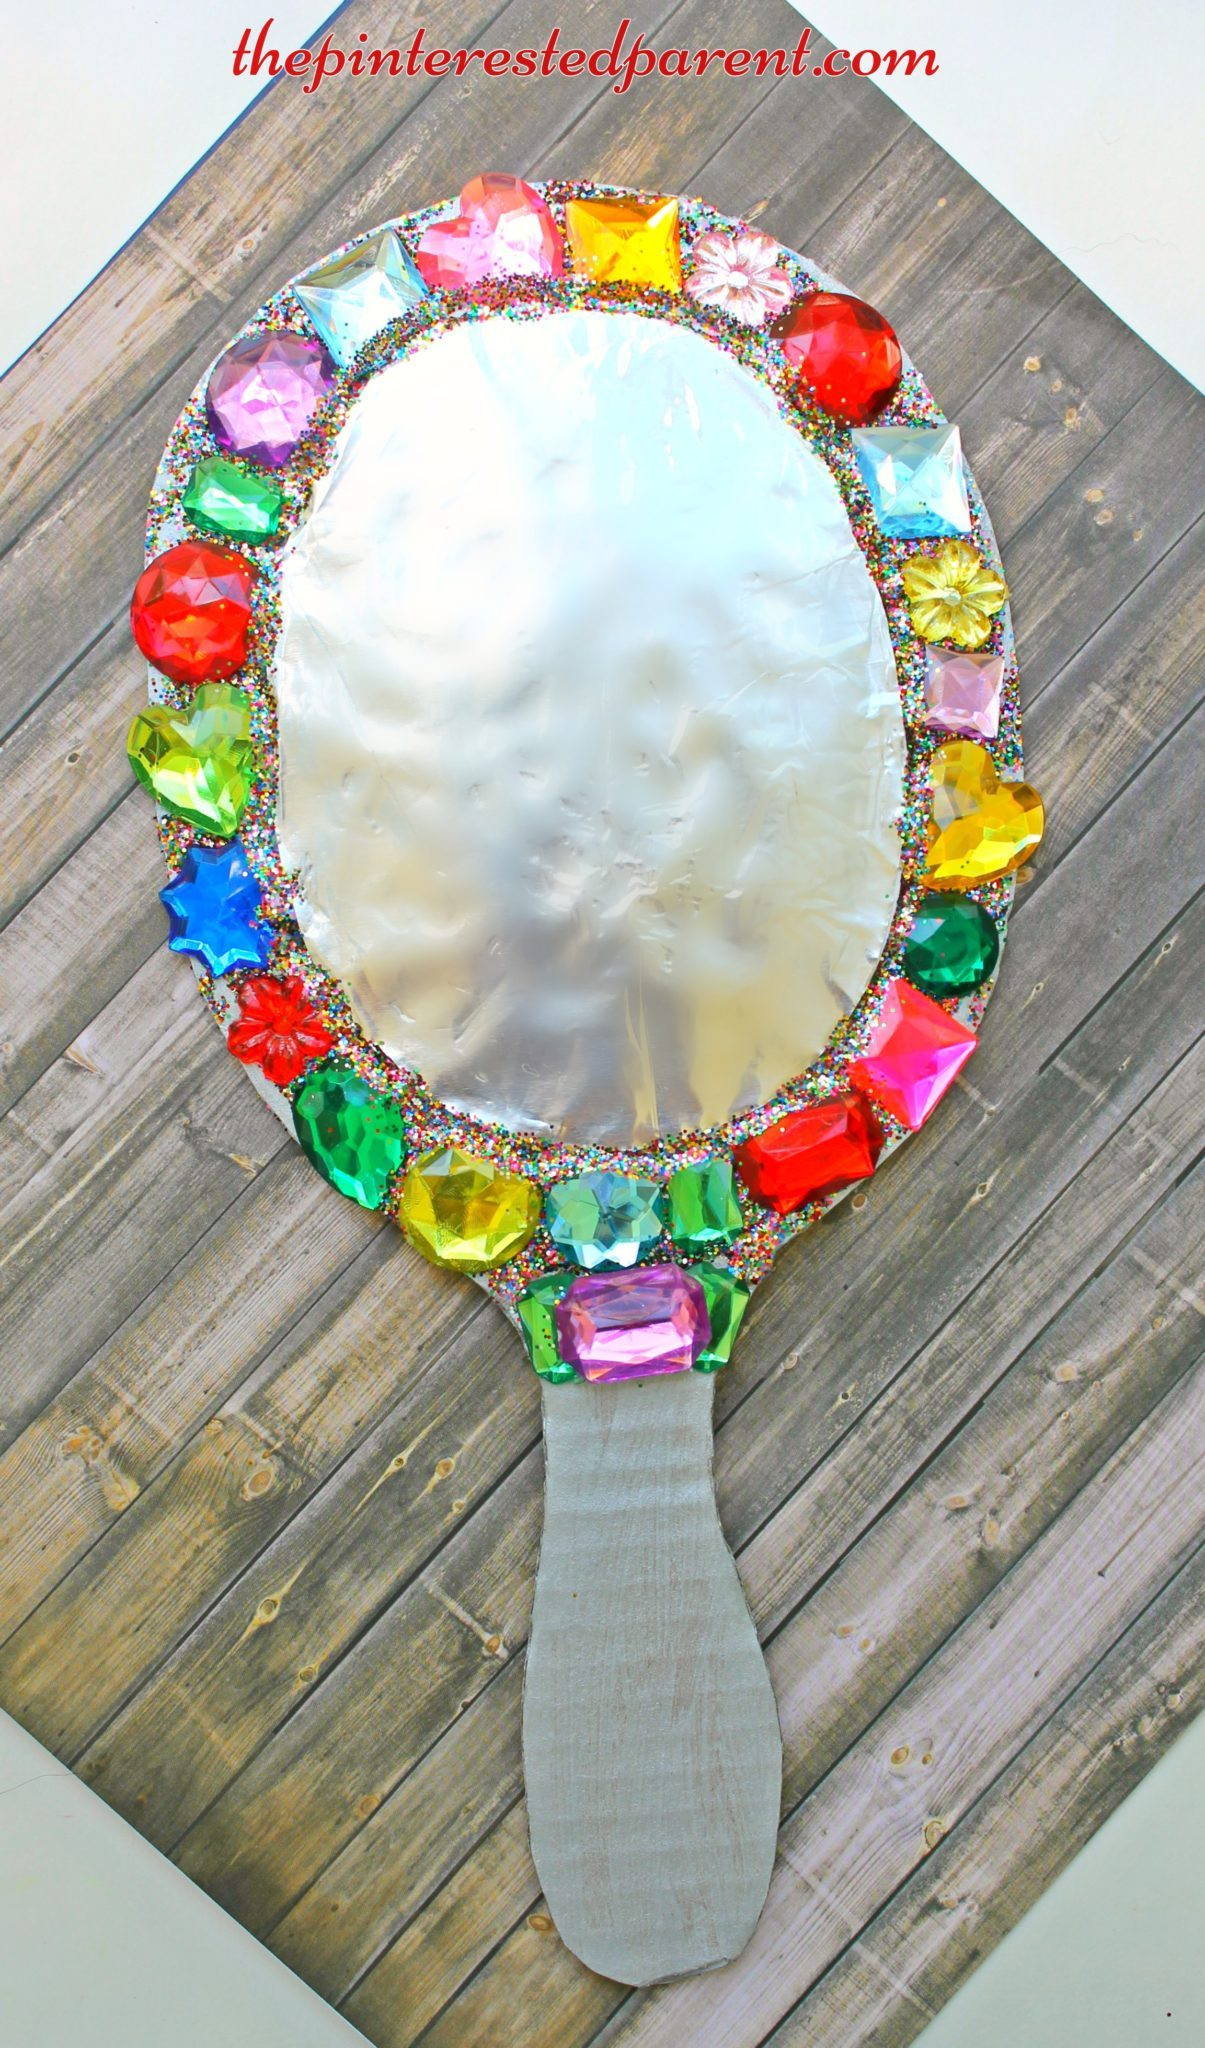 Best ideas about Art Craft For Kids
. Save or Pin Jeweled Cardboard Mirror Craft – The Pinterested Parent Now.